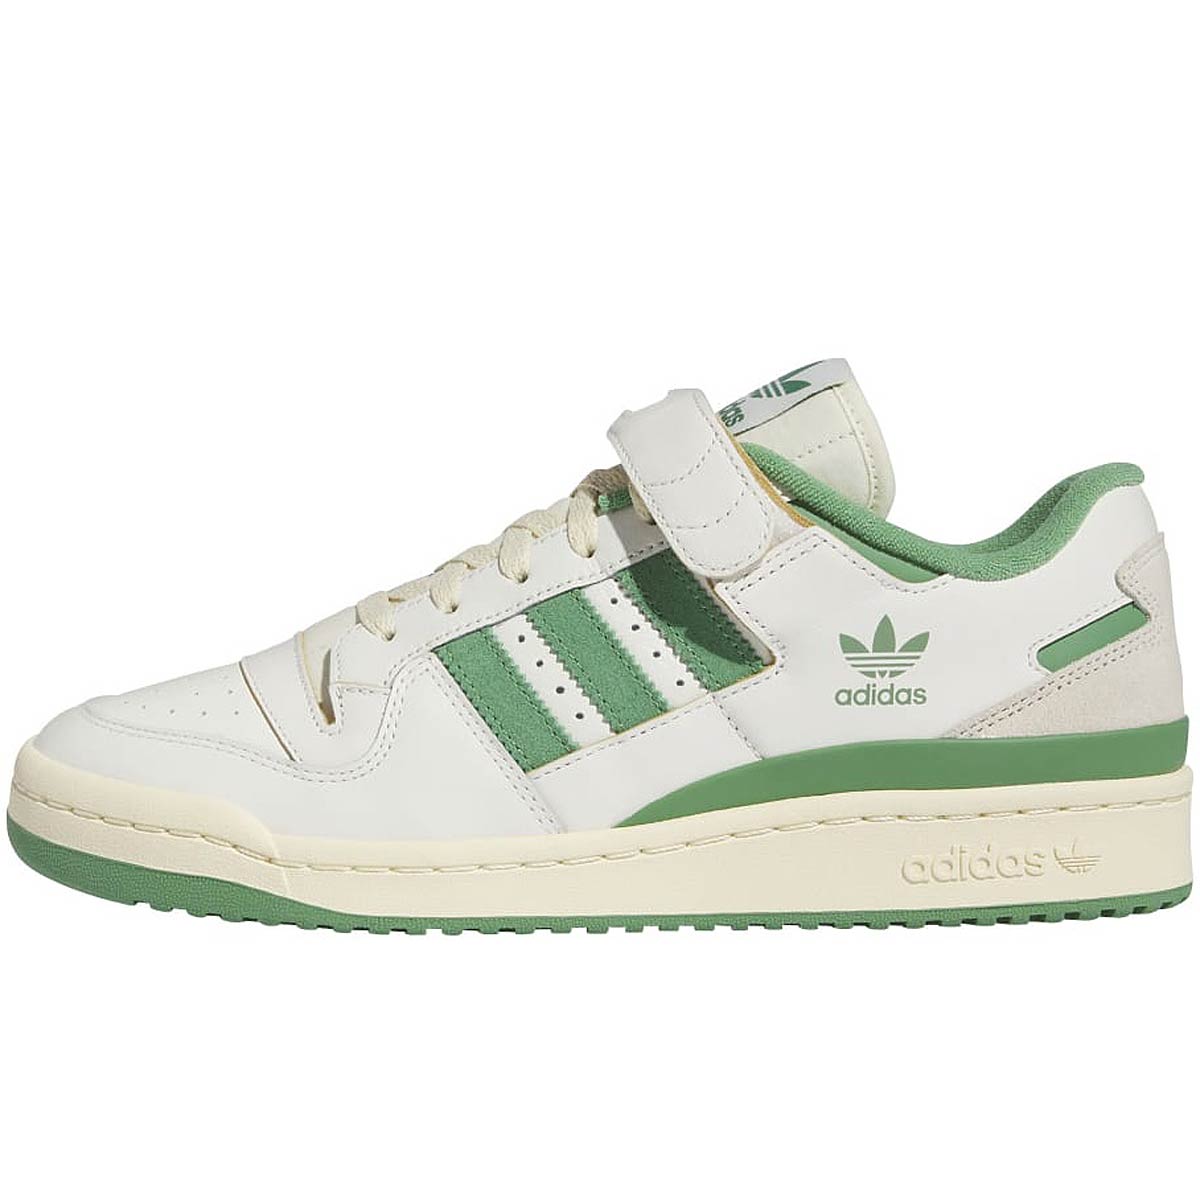 Image of Adidas Forum 84 Low, White/green/green